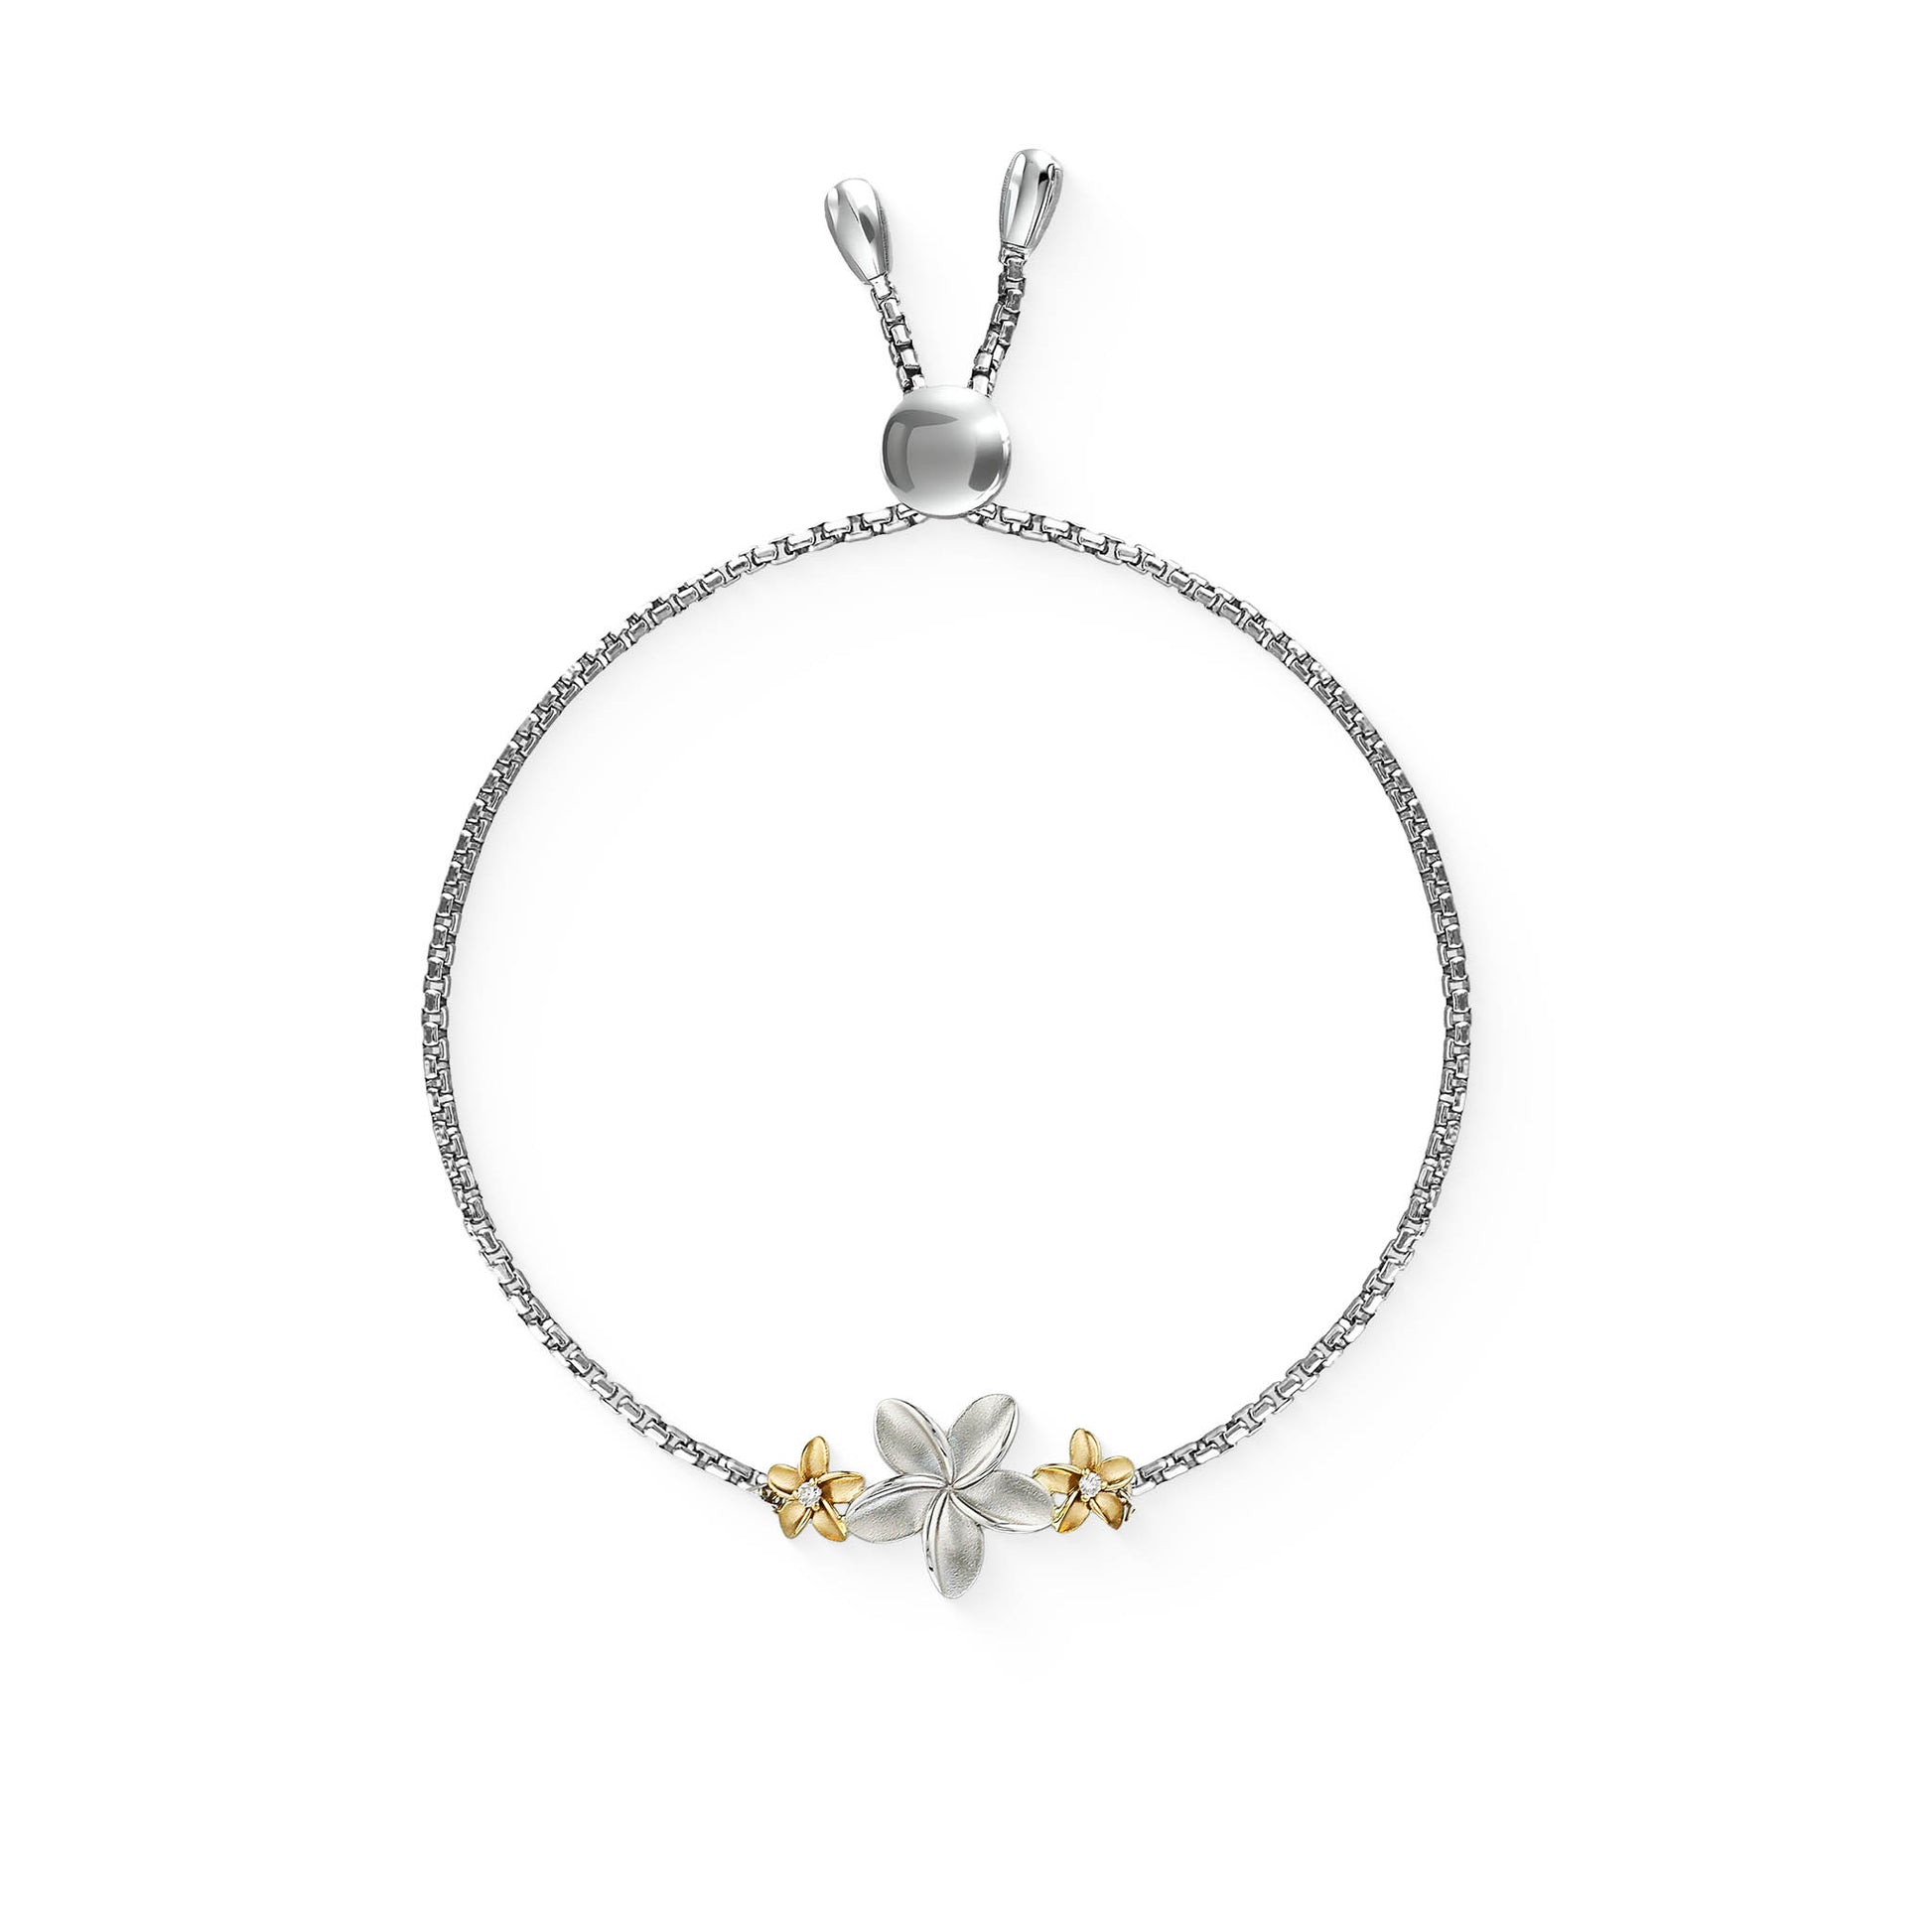 44807 - 14K Yellow Gold and Sterling Silver - Triple Plumeria Bolo Bracelet